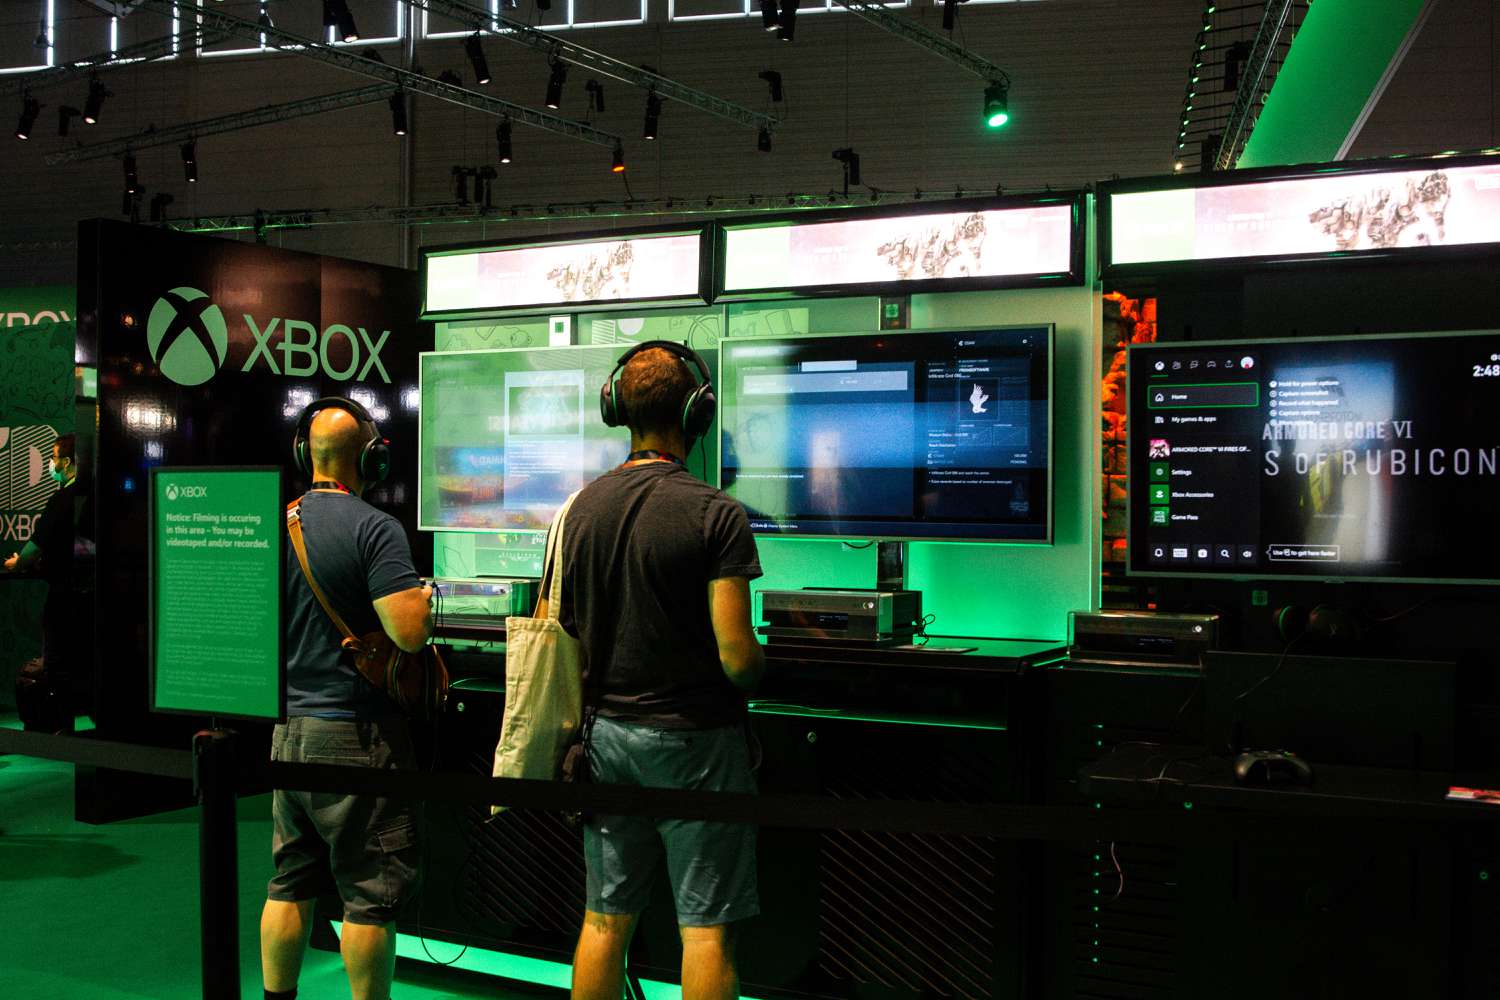 Hard-Core Gamers Rejoice: The New Xbox Mastercard Is Arriving